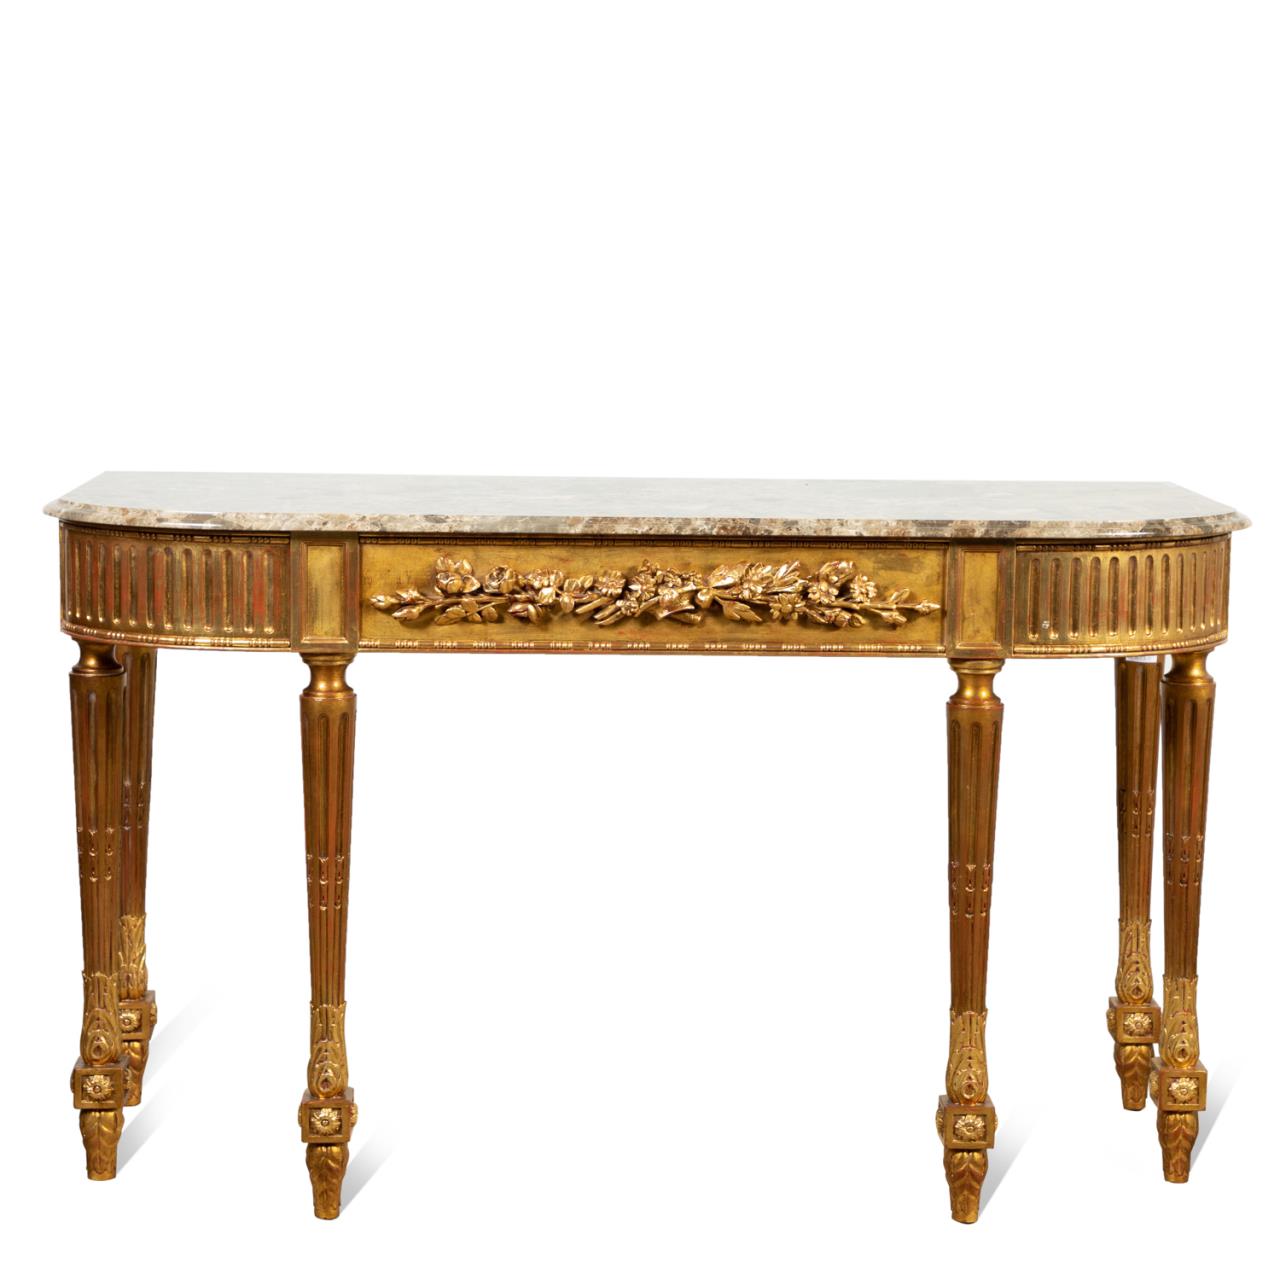 NEOCLASSICAL STYLE MARBLE TOP GILTWOOD